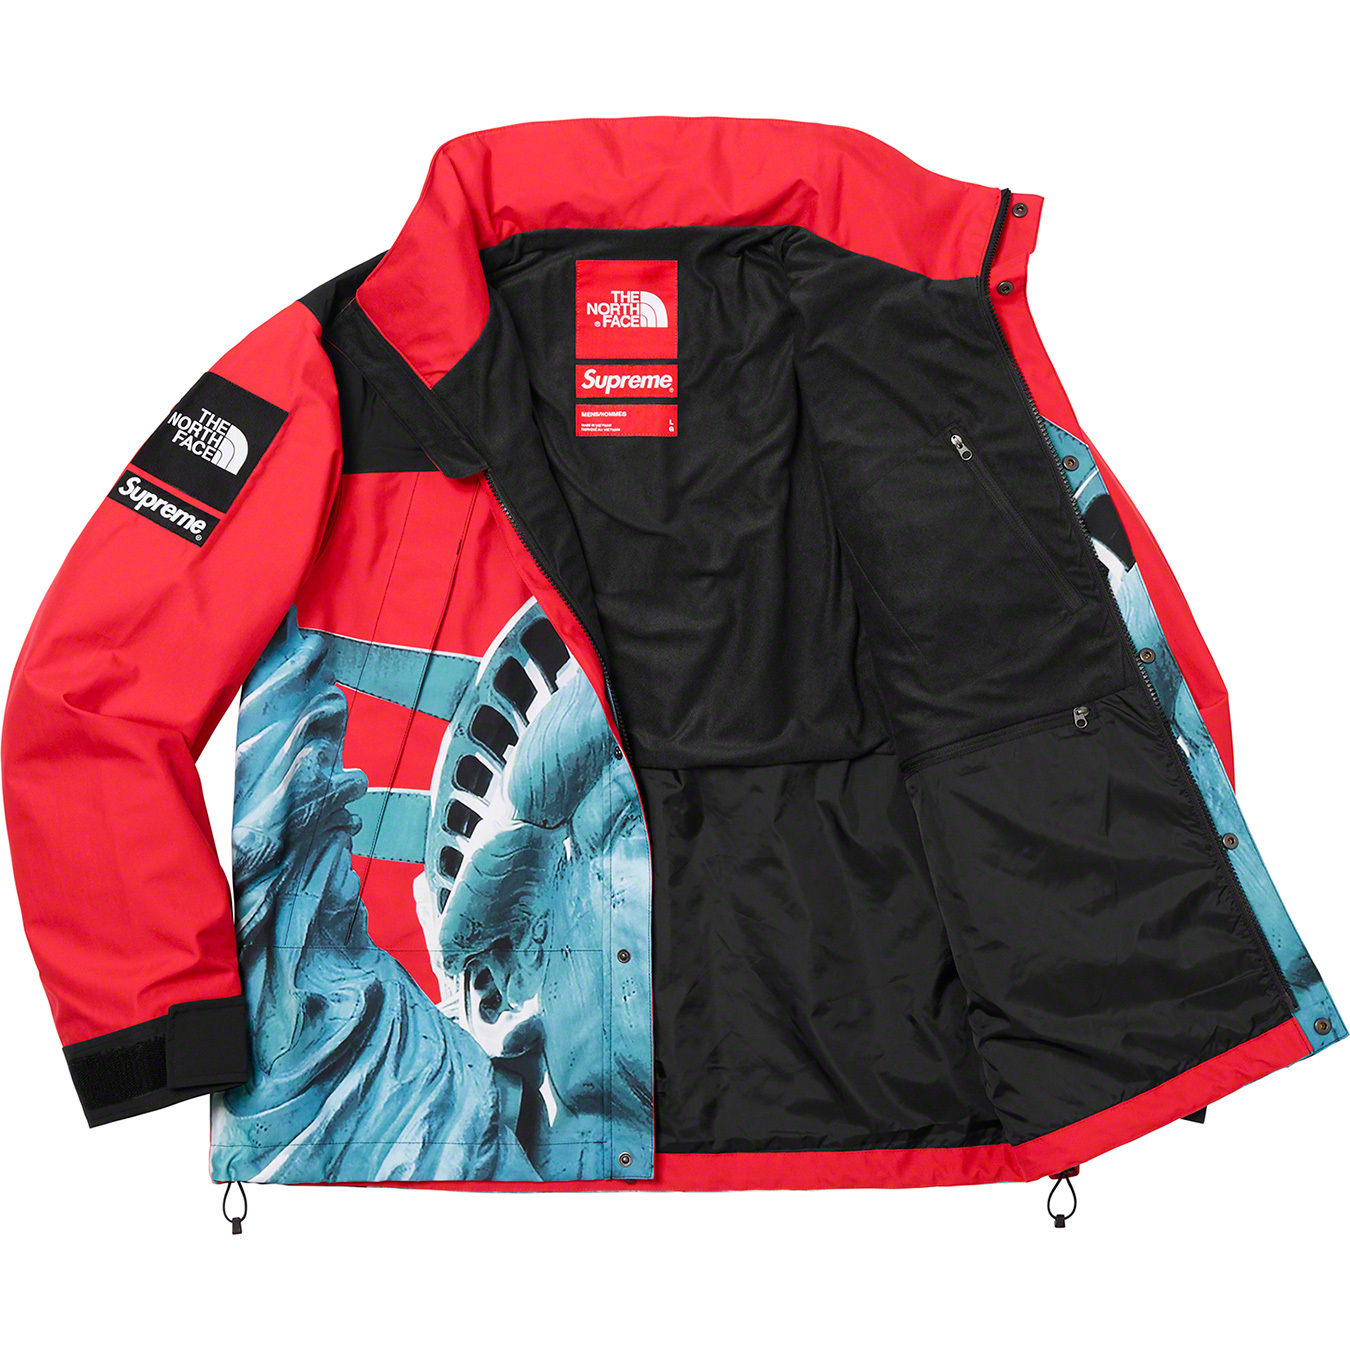 The North Face Statue of Liberty Mountain Jacket - fall winter 2019 -  Supreme